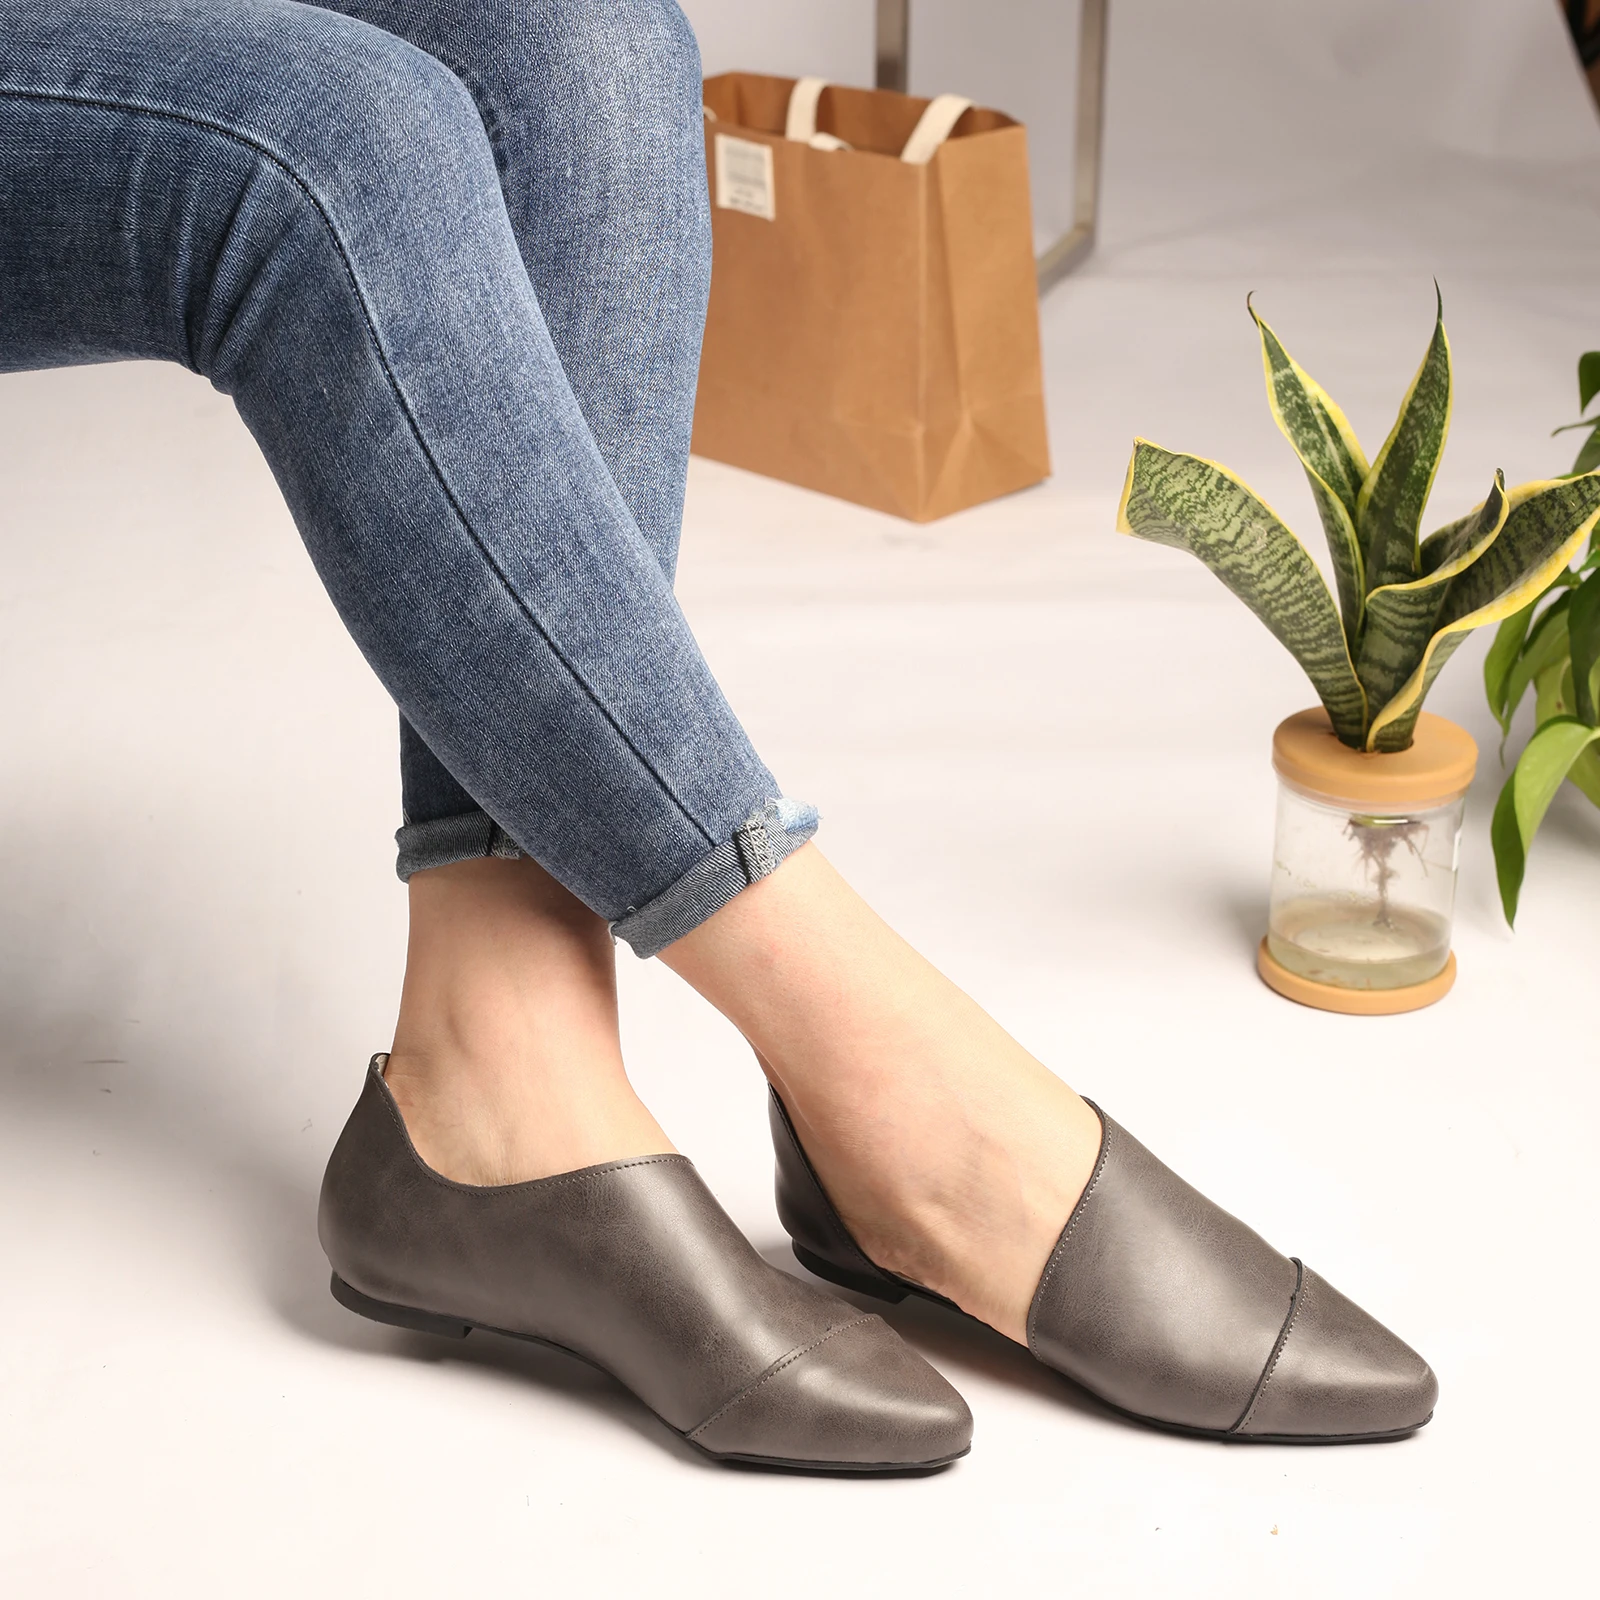 Pointed Toe Oxford Shoes Woman, British Pointed Toe Shoes